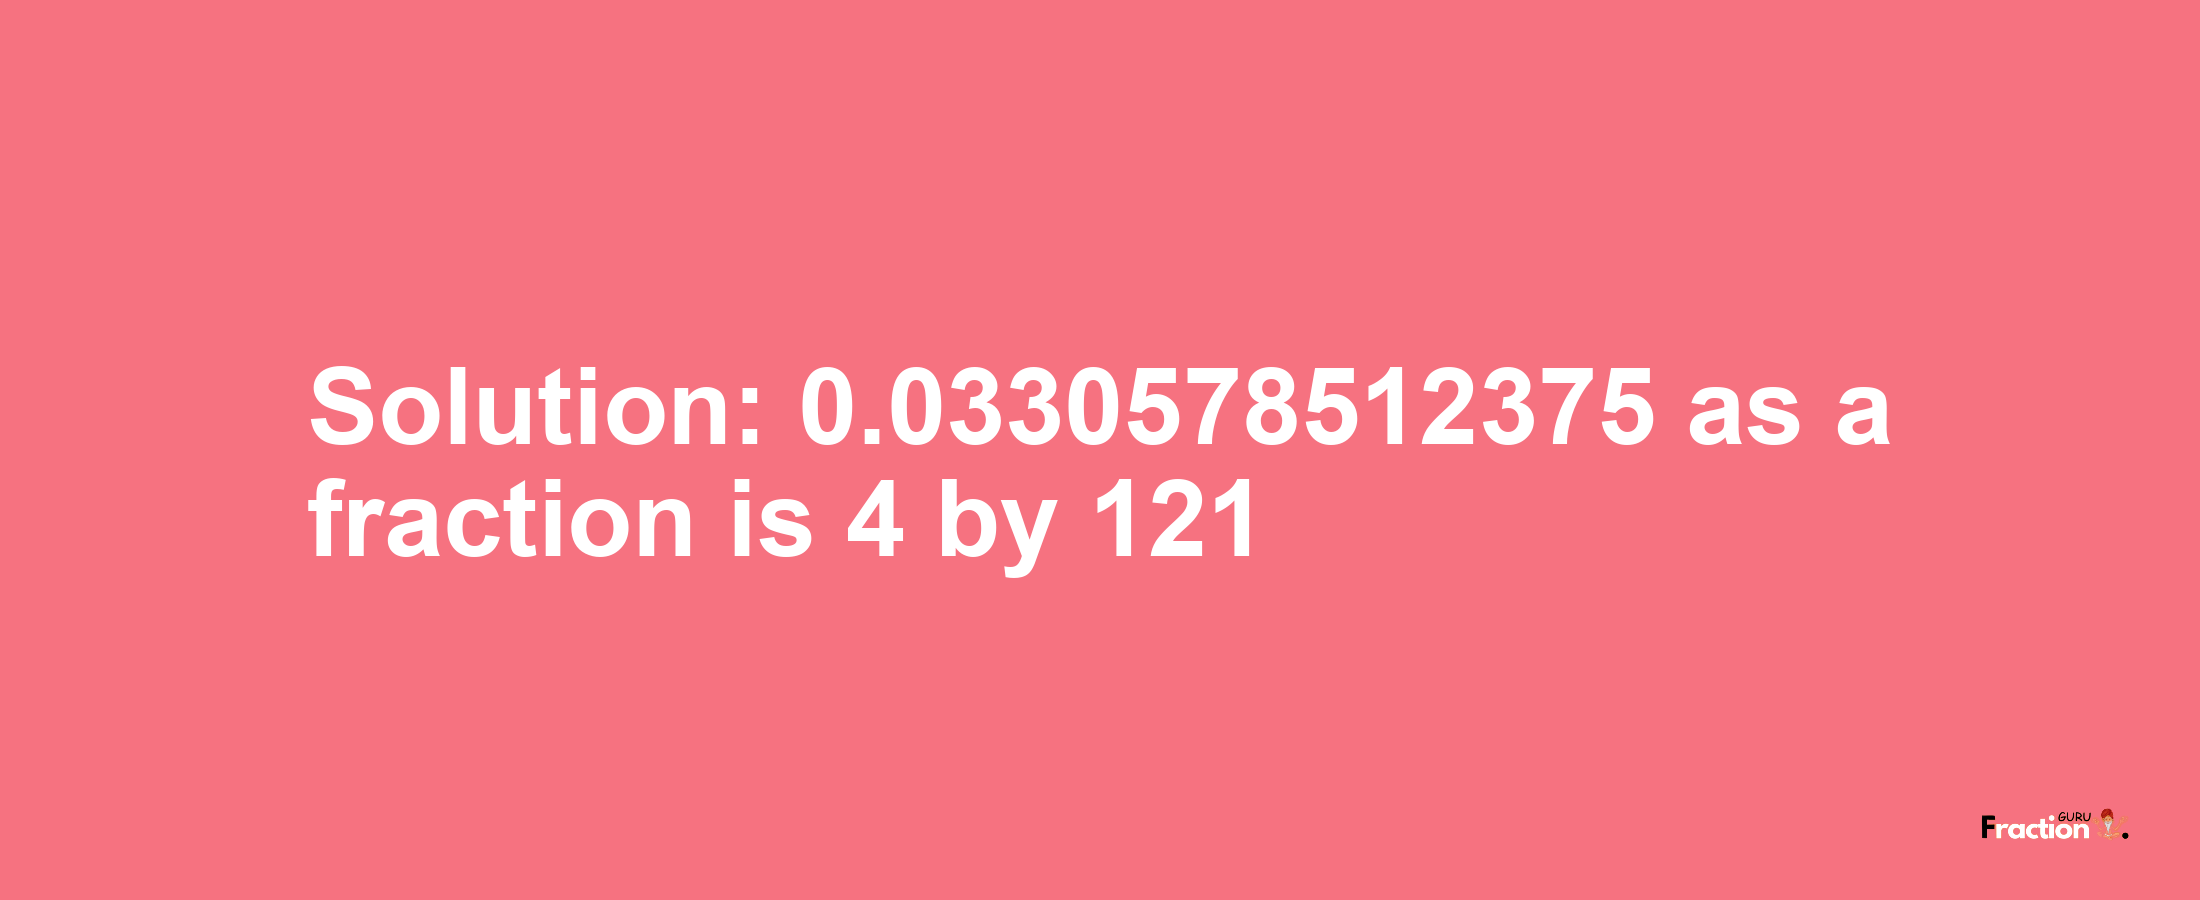 Solution:0.0330578512375 as a fraction is 4/121